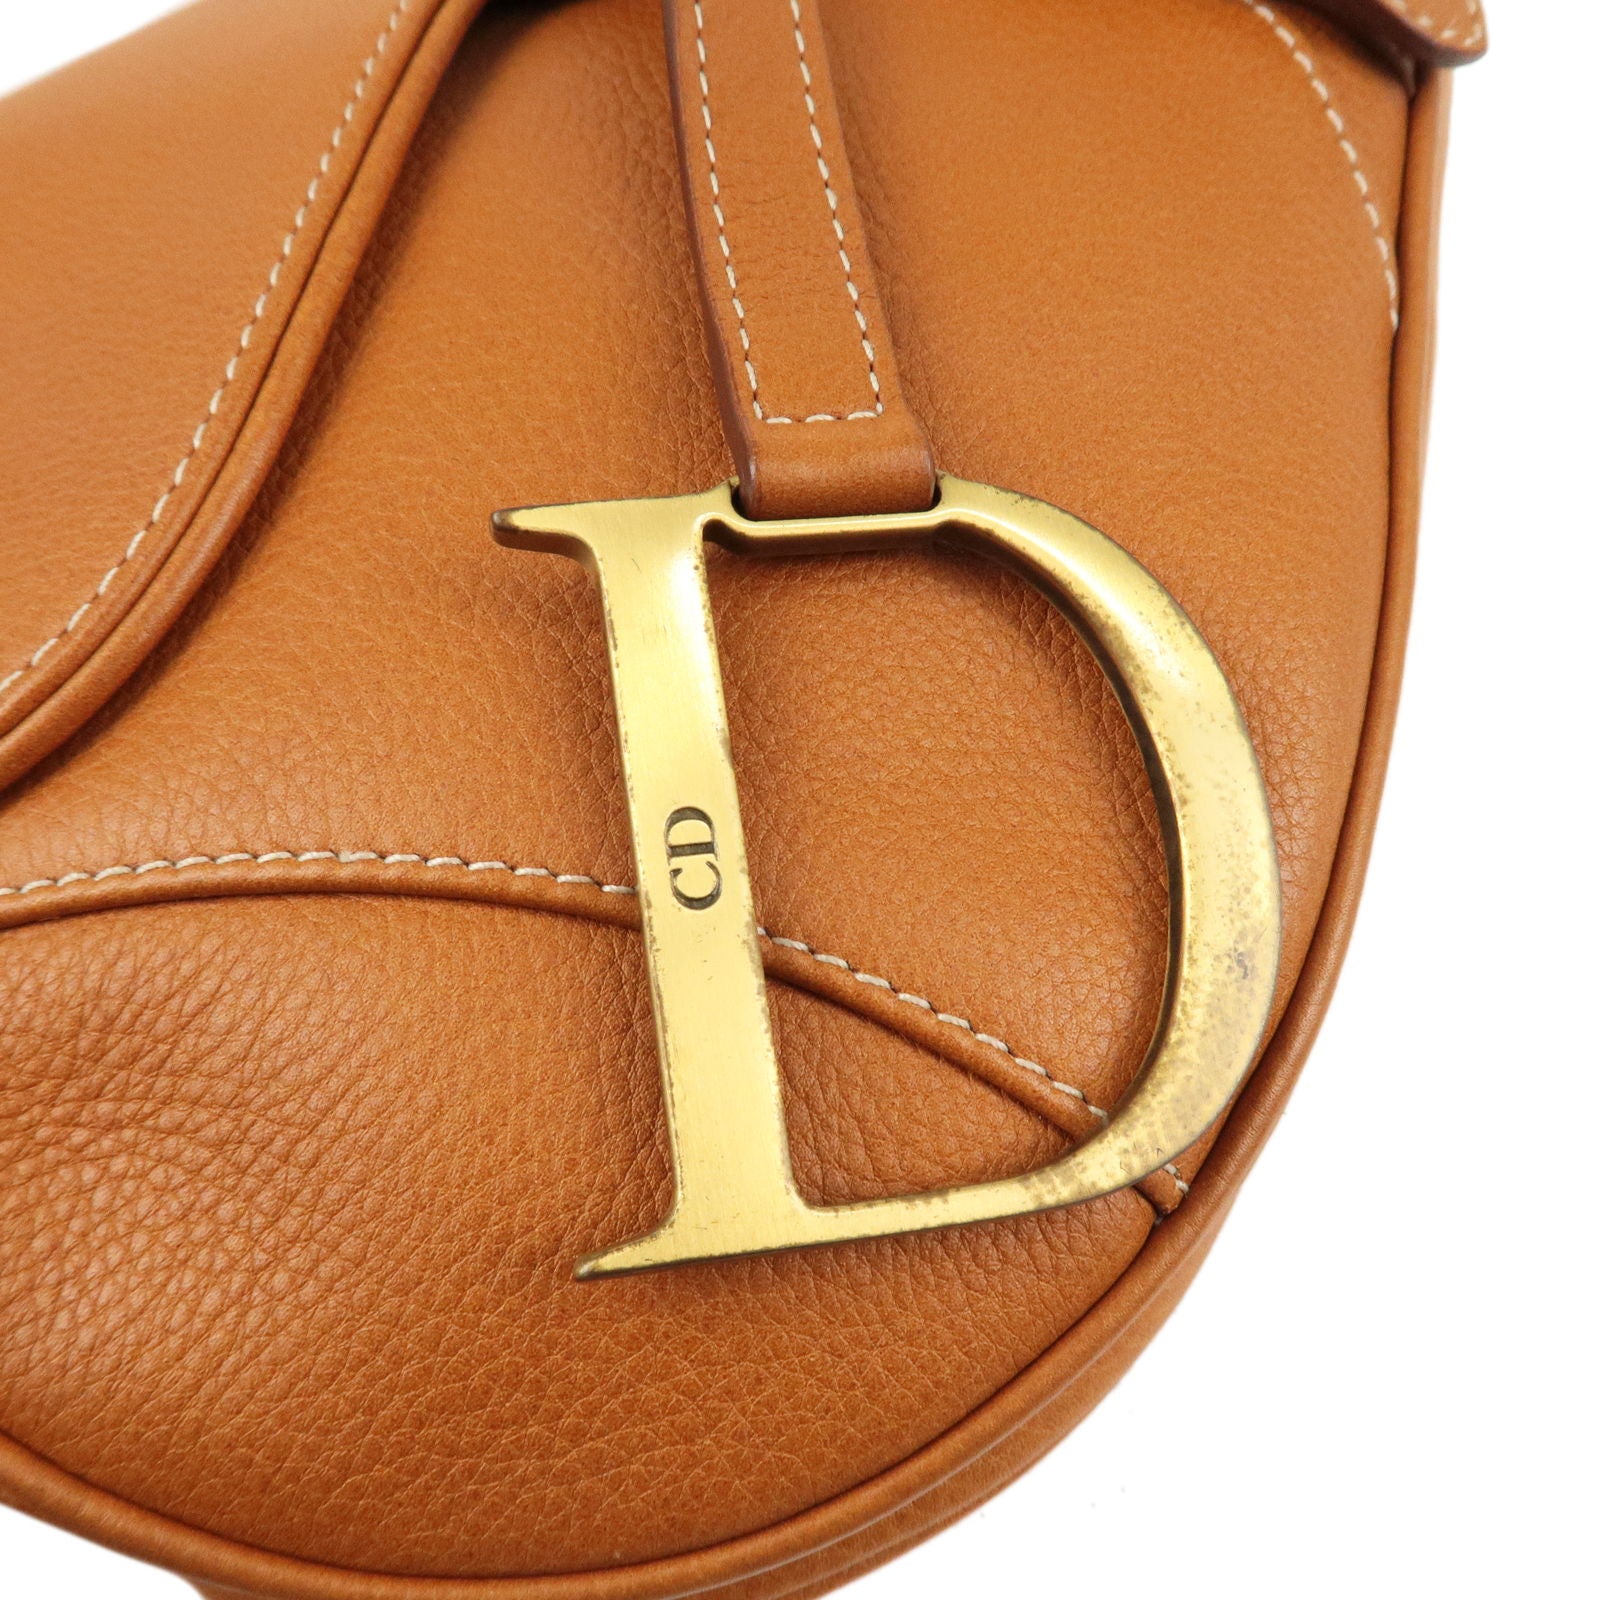 6 Things To Know About the Dior Saddle Bag